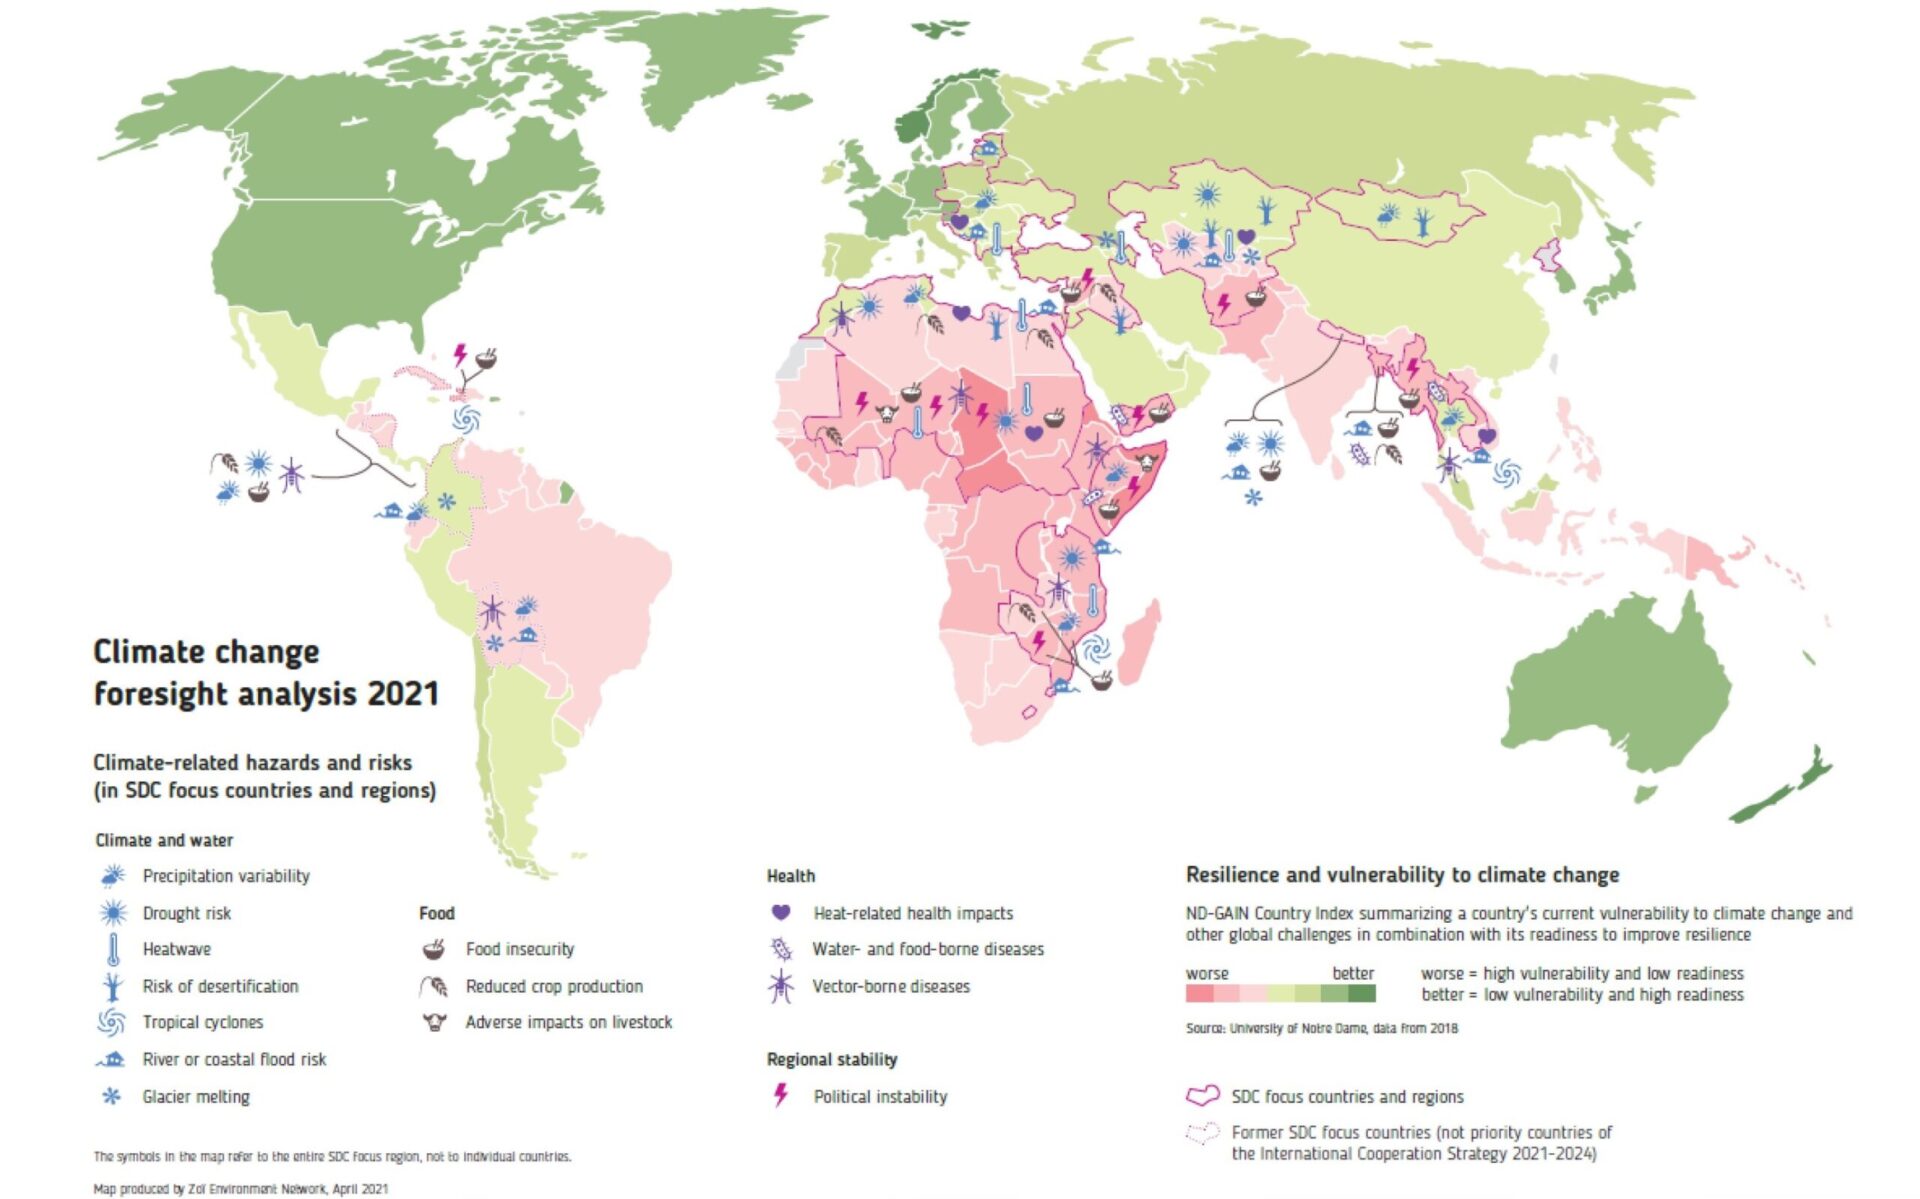 Figure 2 from page 8 of the report: SDC Climate change foresight analysis Global and regional risks and hotspots Update 2021. (Click to enlarge)